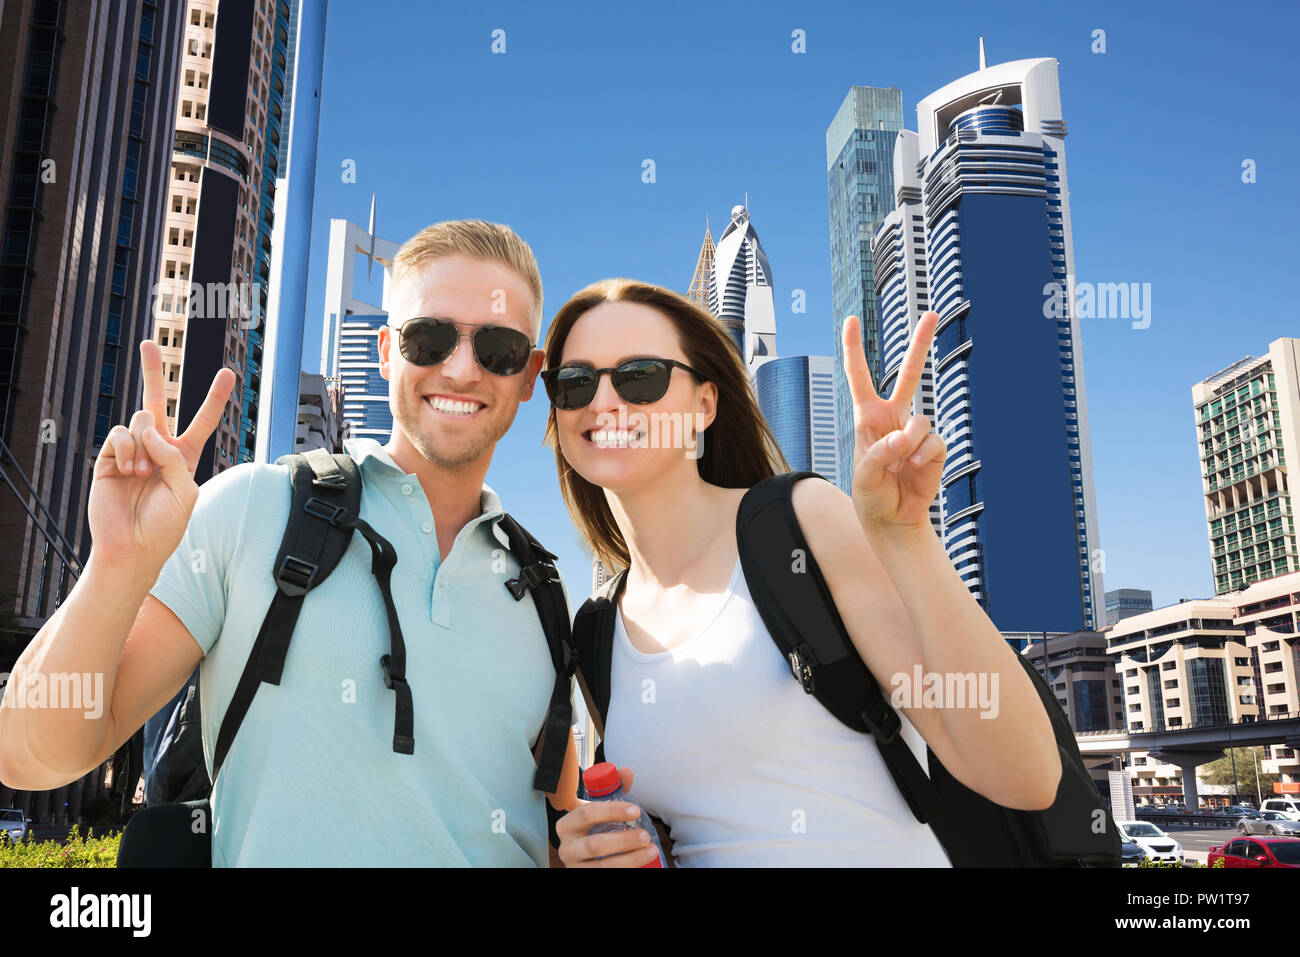 Portrait Of Happy Young Couple Gesturing Peace Sign In City Banque D'Images